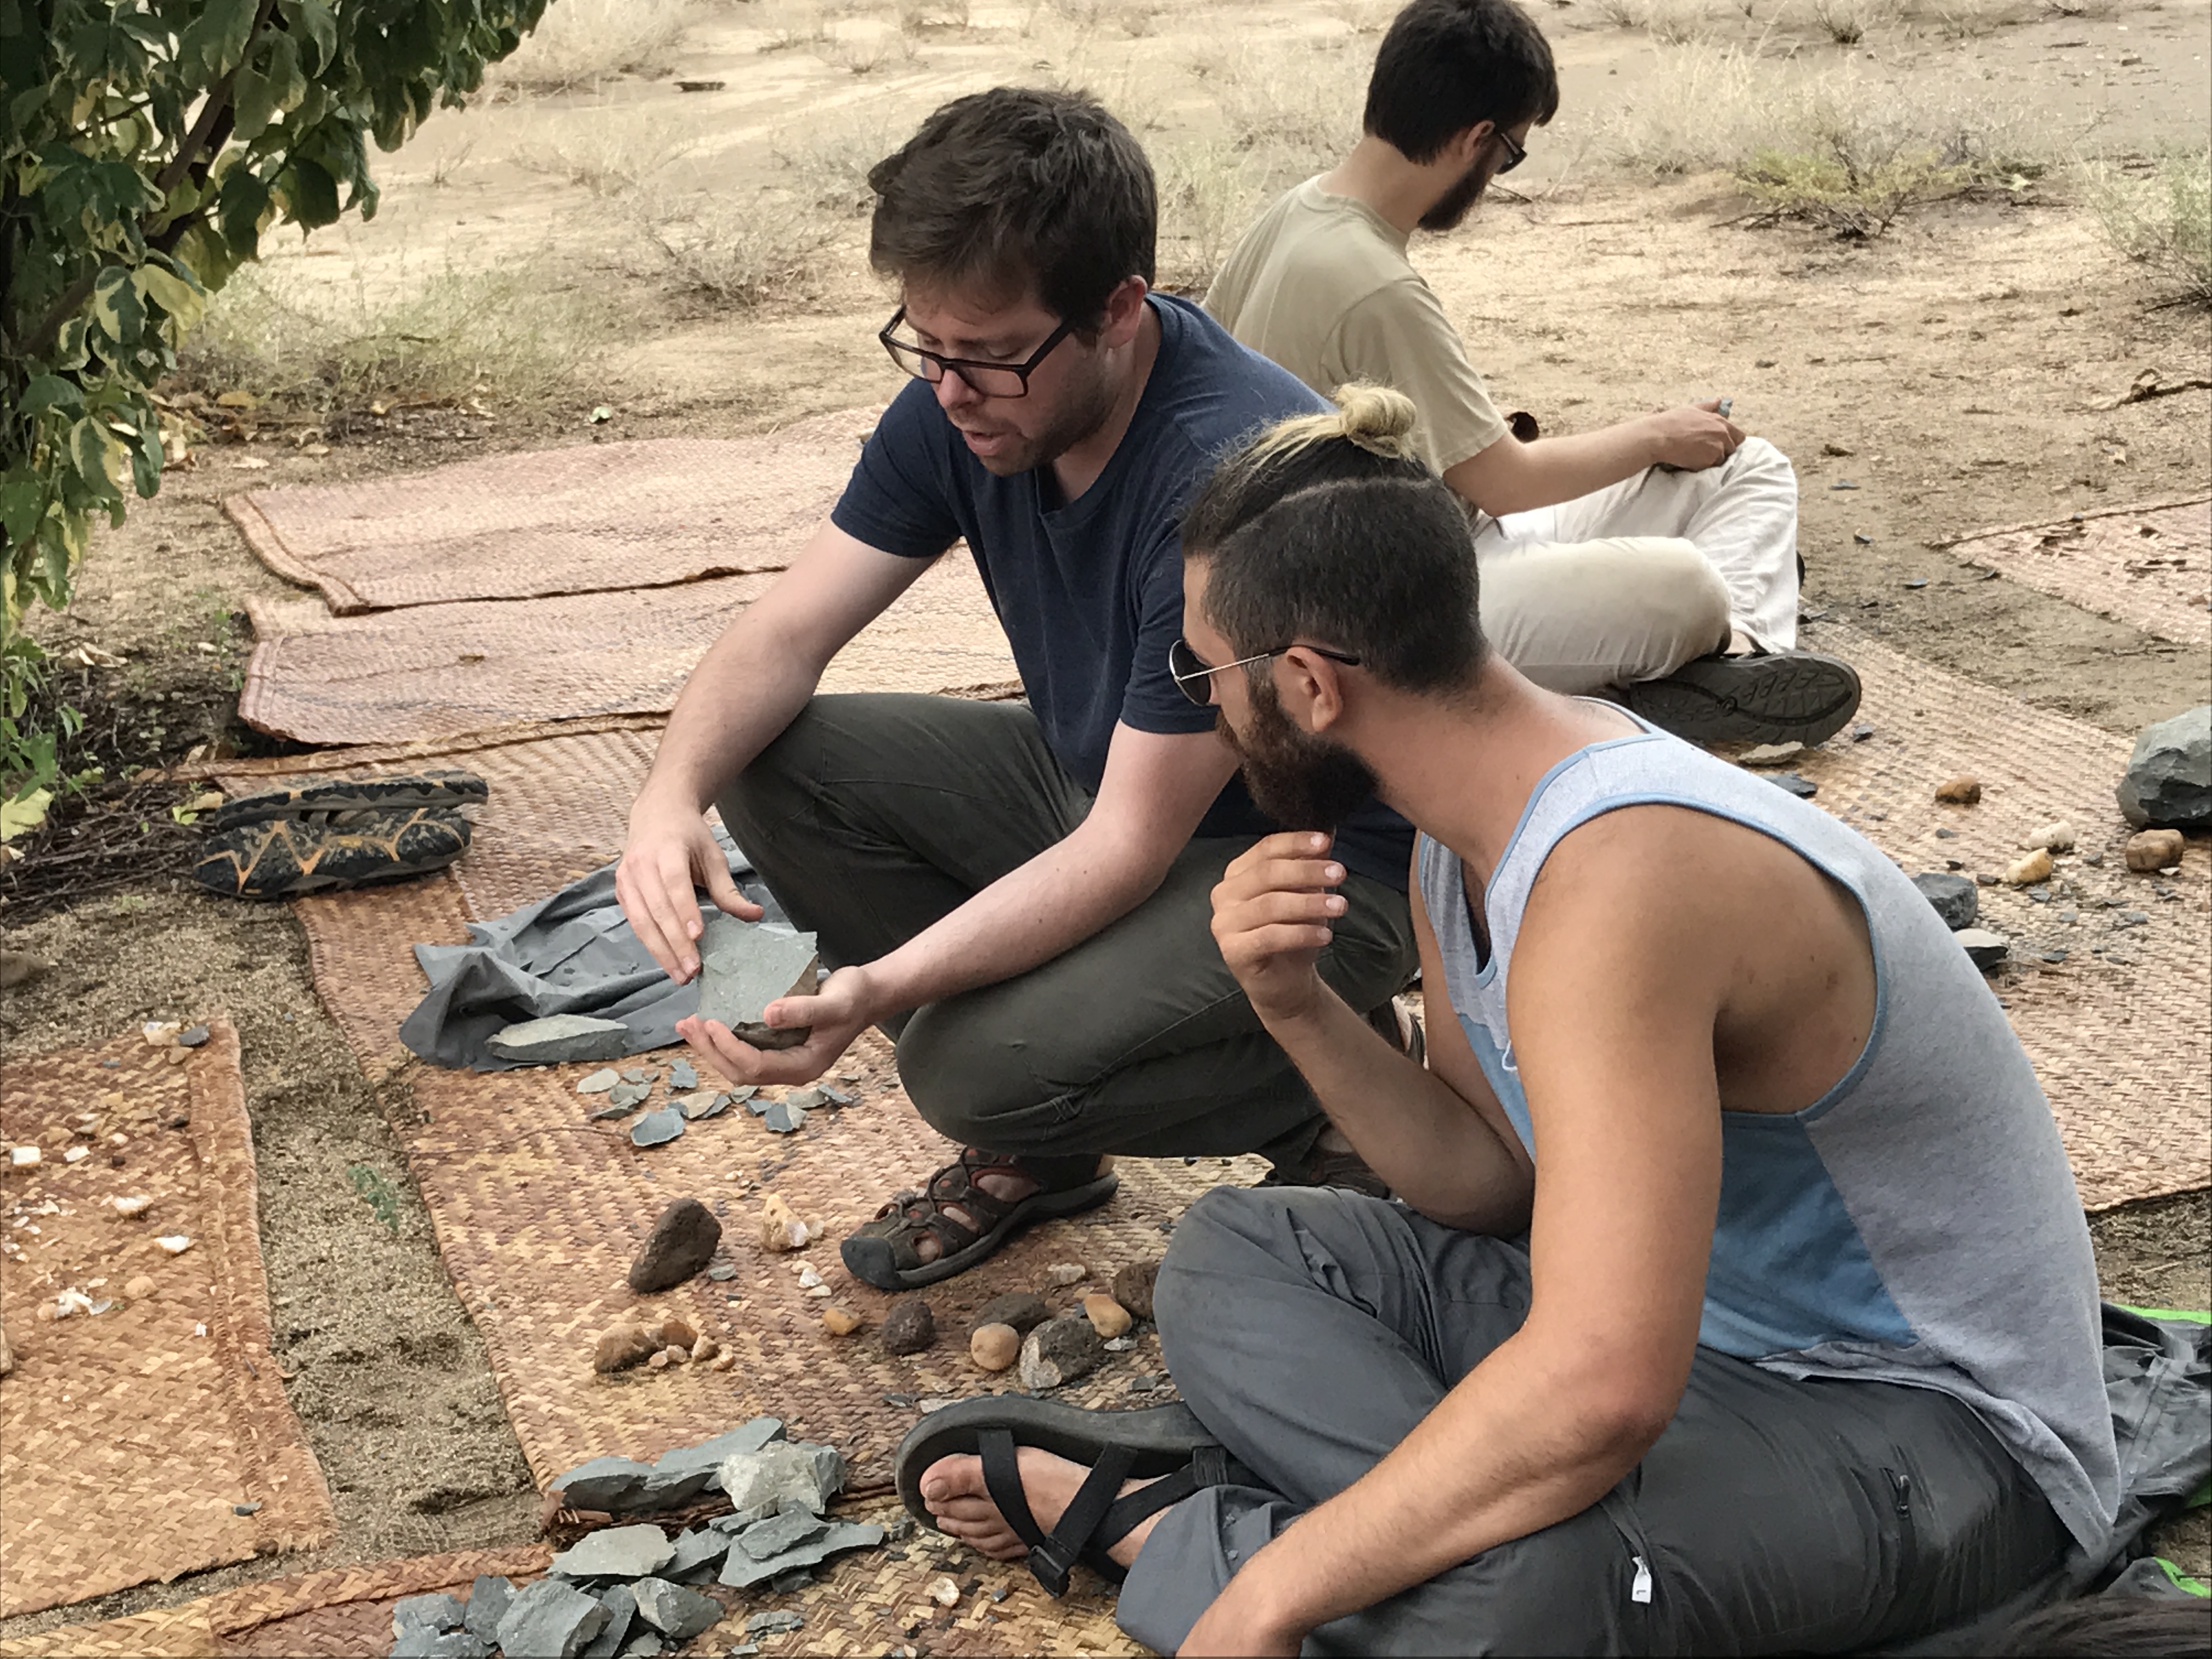 Final week: archaeology, stone knapping, and graduation!